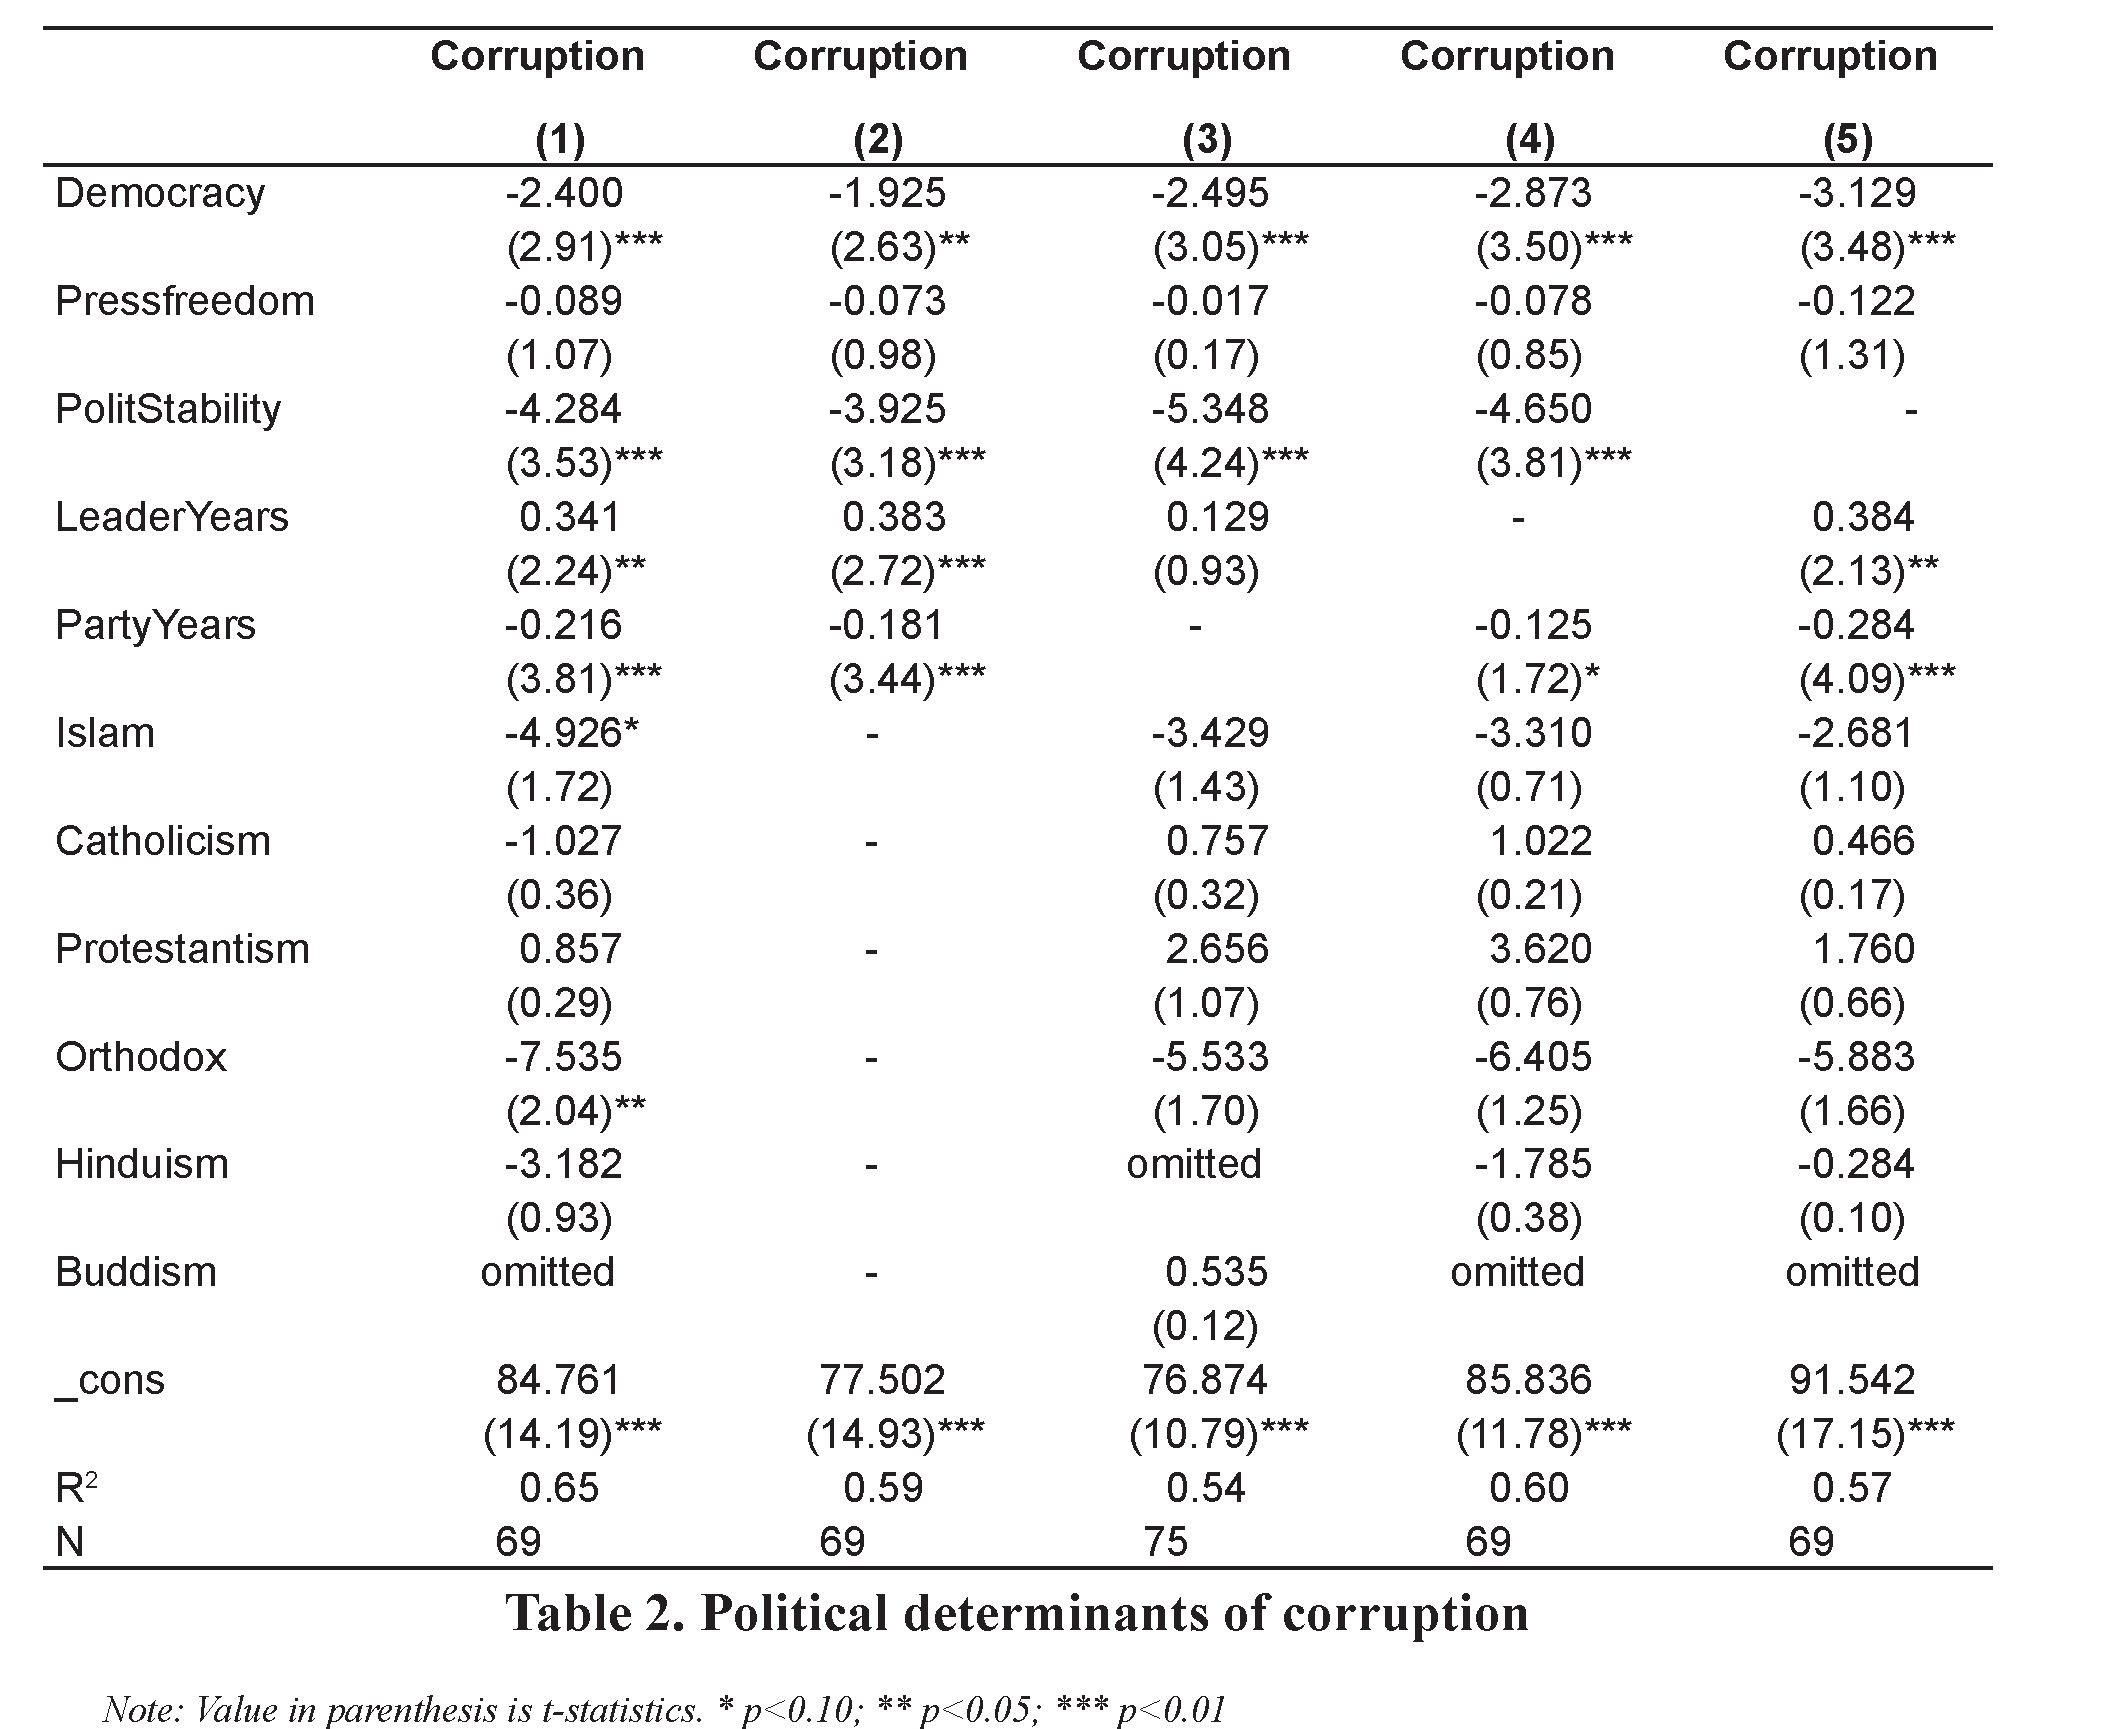 The explanatory factors of corruption in the developing world